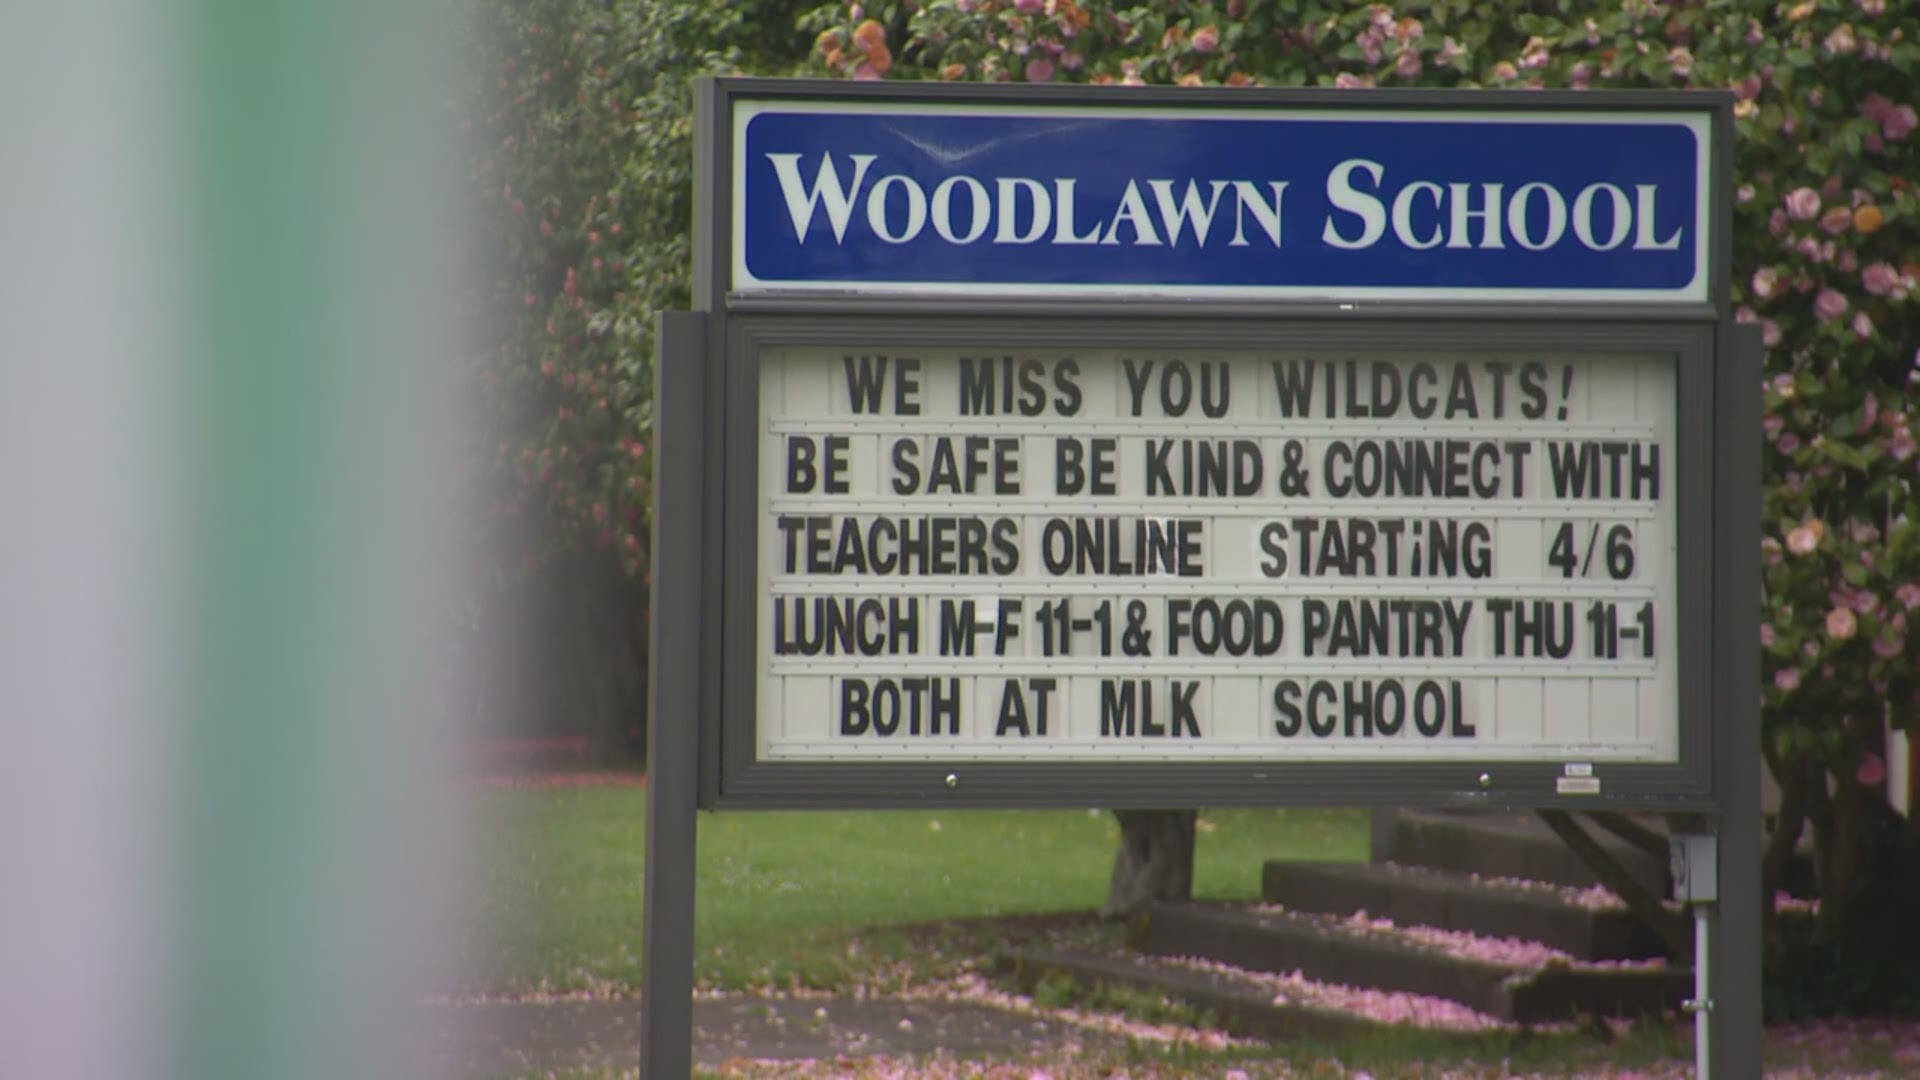 KGW continues its yearlong series Inside Woodlawn with an in-depth look at how online learning is going for kids, teachers and parents at Woodlawn Elementary.